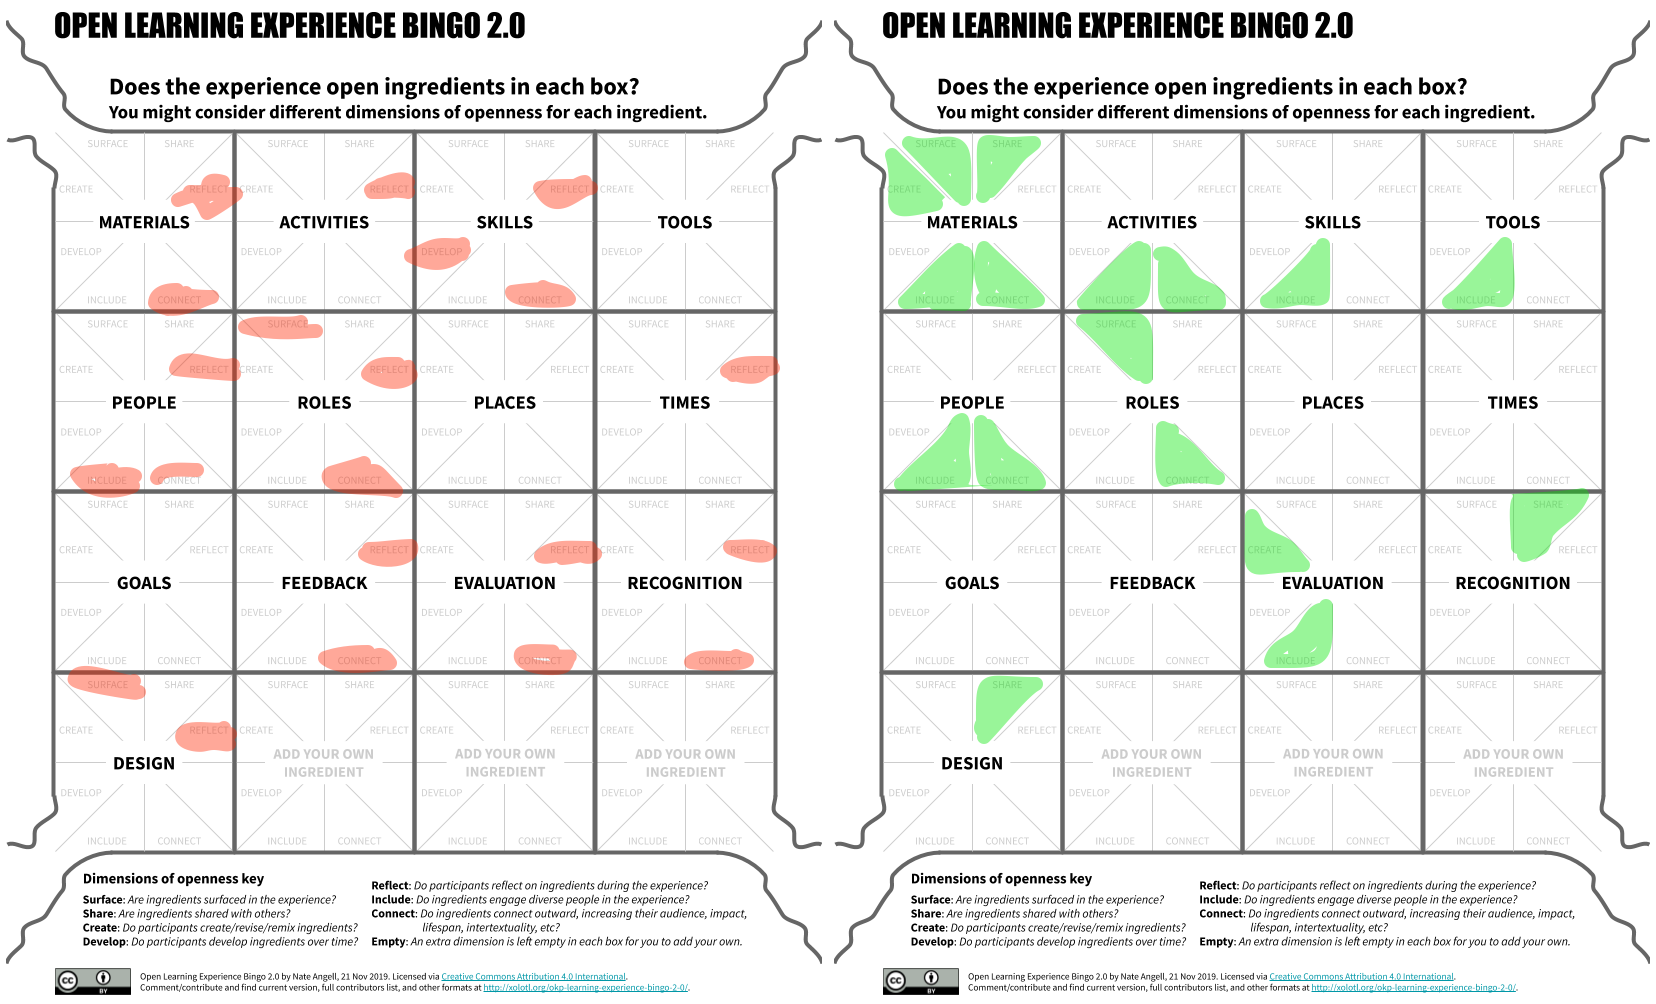 Two 4x4 bingo cards side-by-side with highlights on various dimensions of openness in various learning experience ingredient squares.